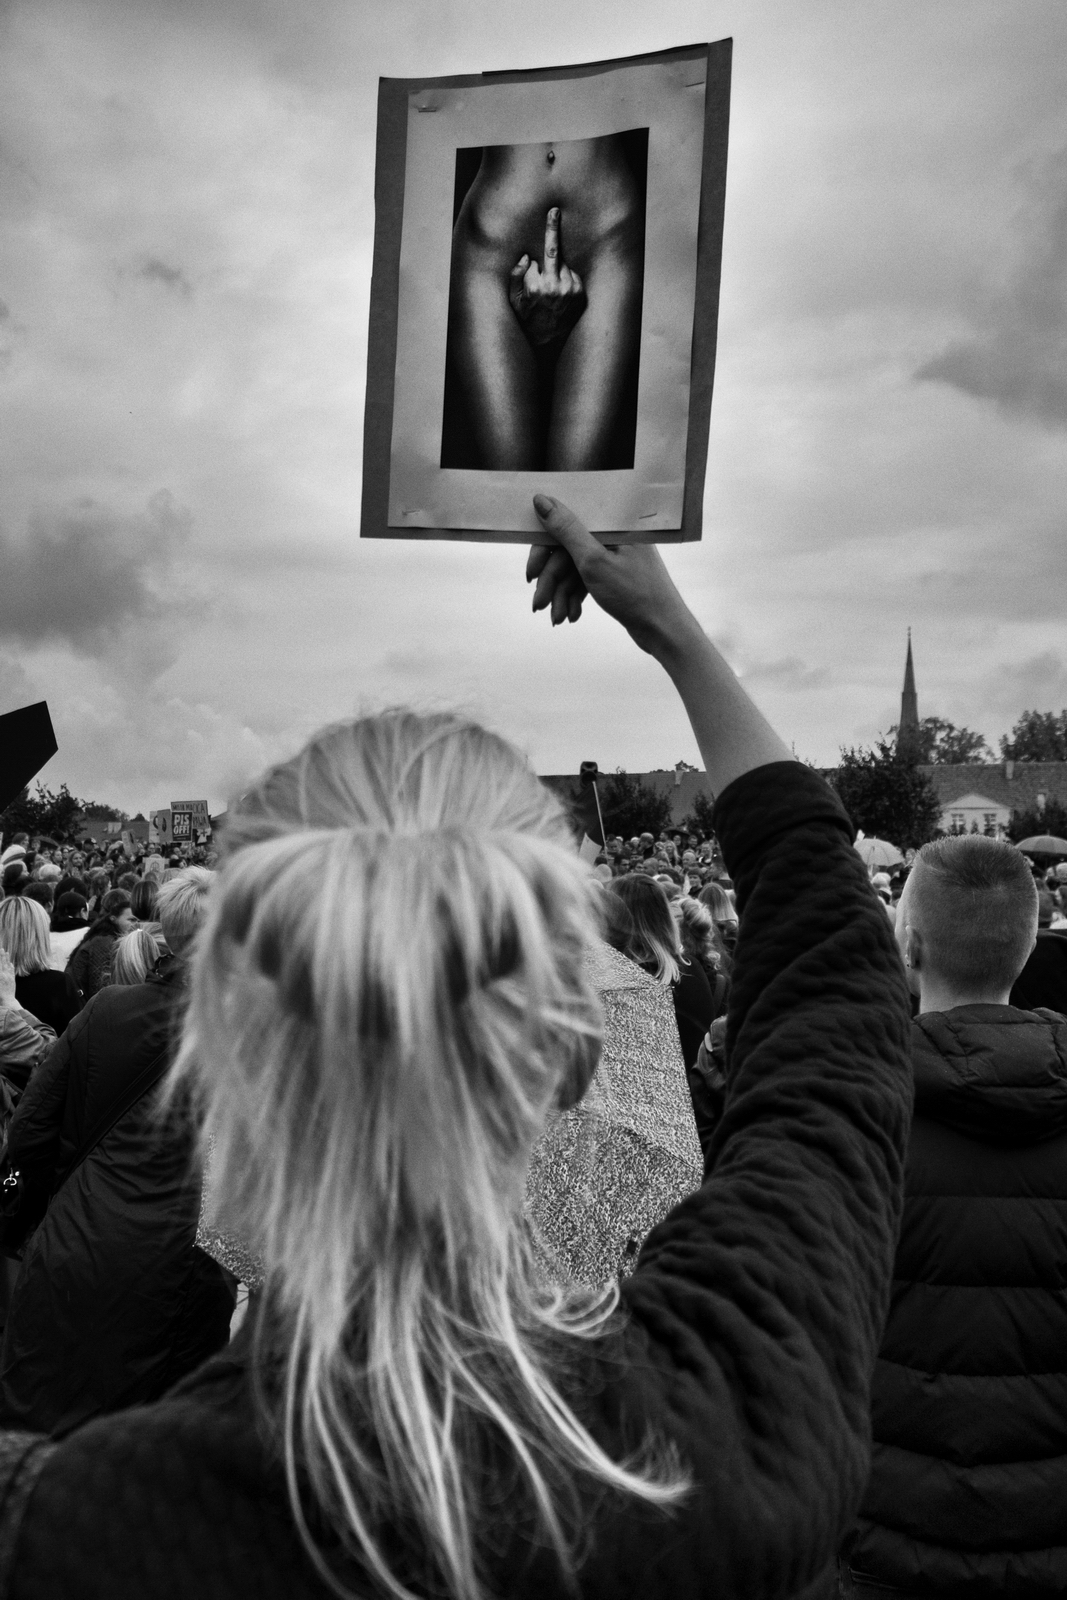 Black Protest – October 3, 2016, Poland, in the so-called "Black Monday" women took time off work to take to protest against the tightening abortion laws and access to contraception. It's sad and pathetic as the new government in Poland wants to have an impact on everything. The scale of the protest, its form, the number of people gathered spontaneously and their cross exceeded my wildest expectations. Fuji XPro-2, XF 10-20, 1/320s, f5.6, ISO 400